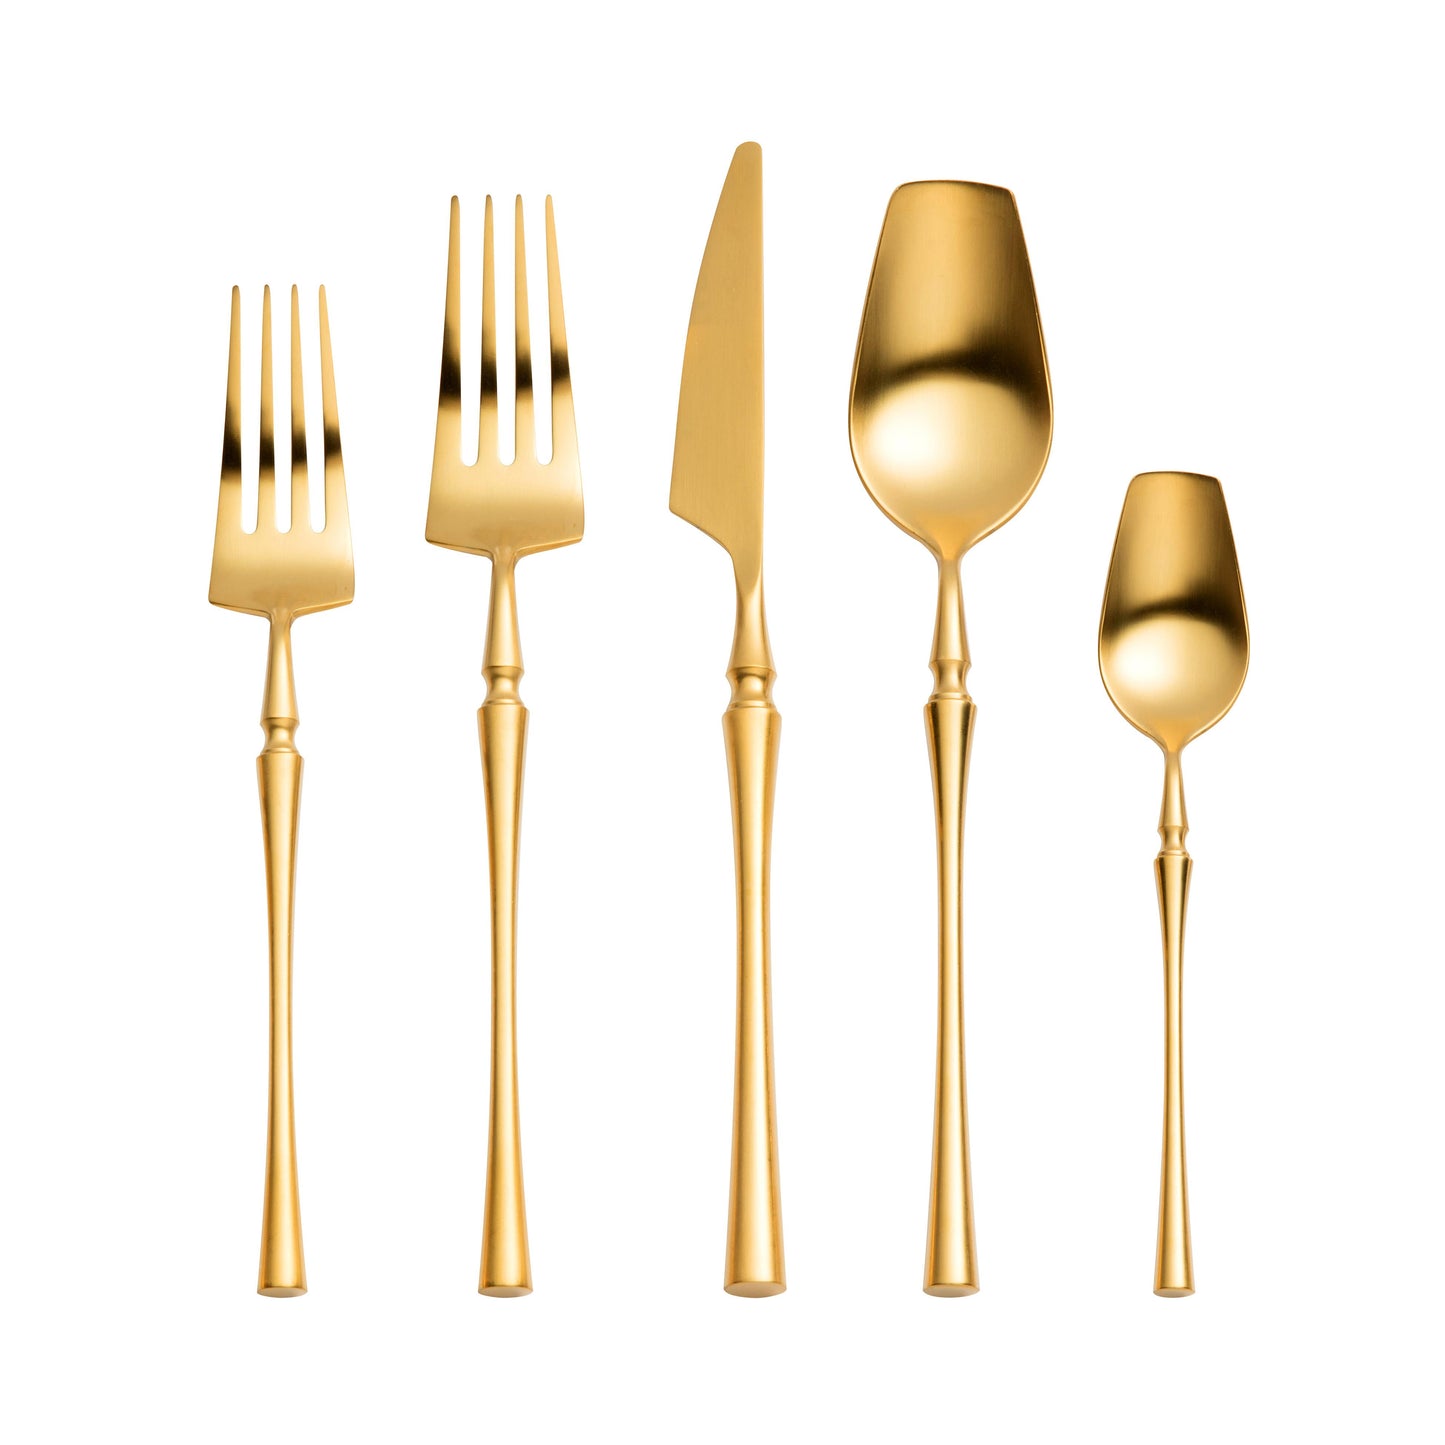 ladder brushed gold stainless steel flatware - set of 5 pieces - service for 1